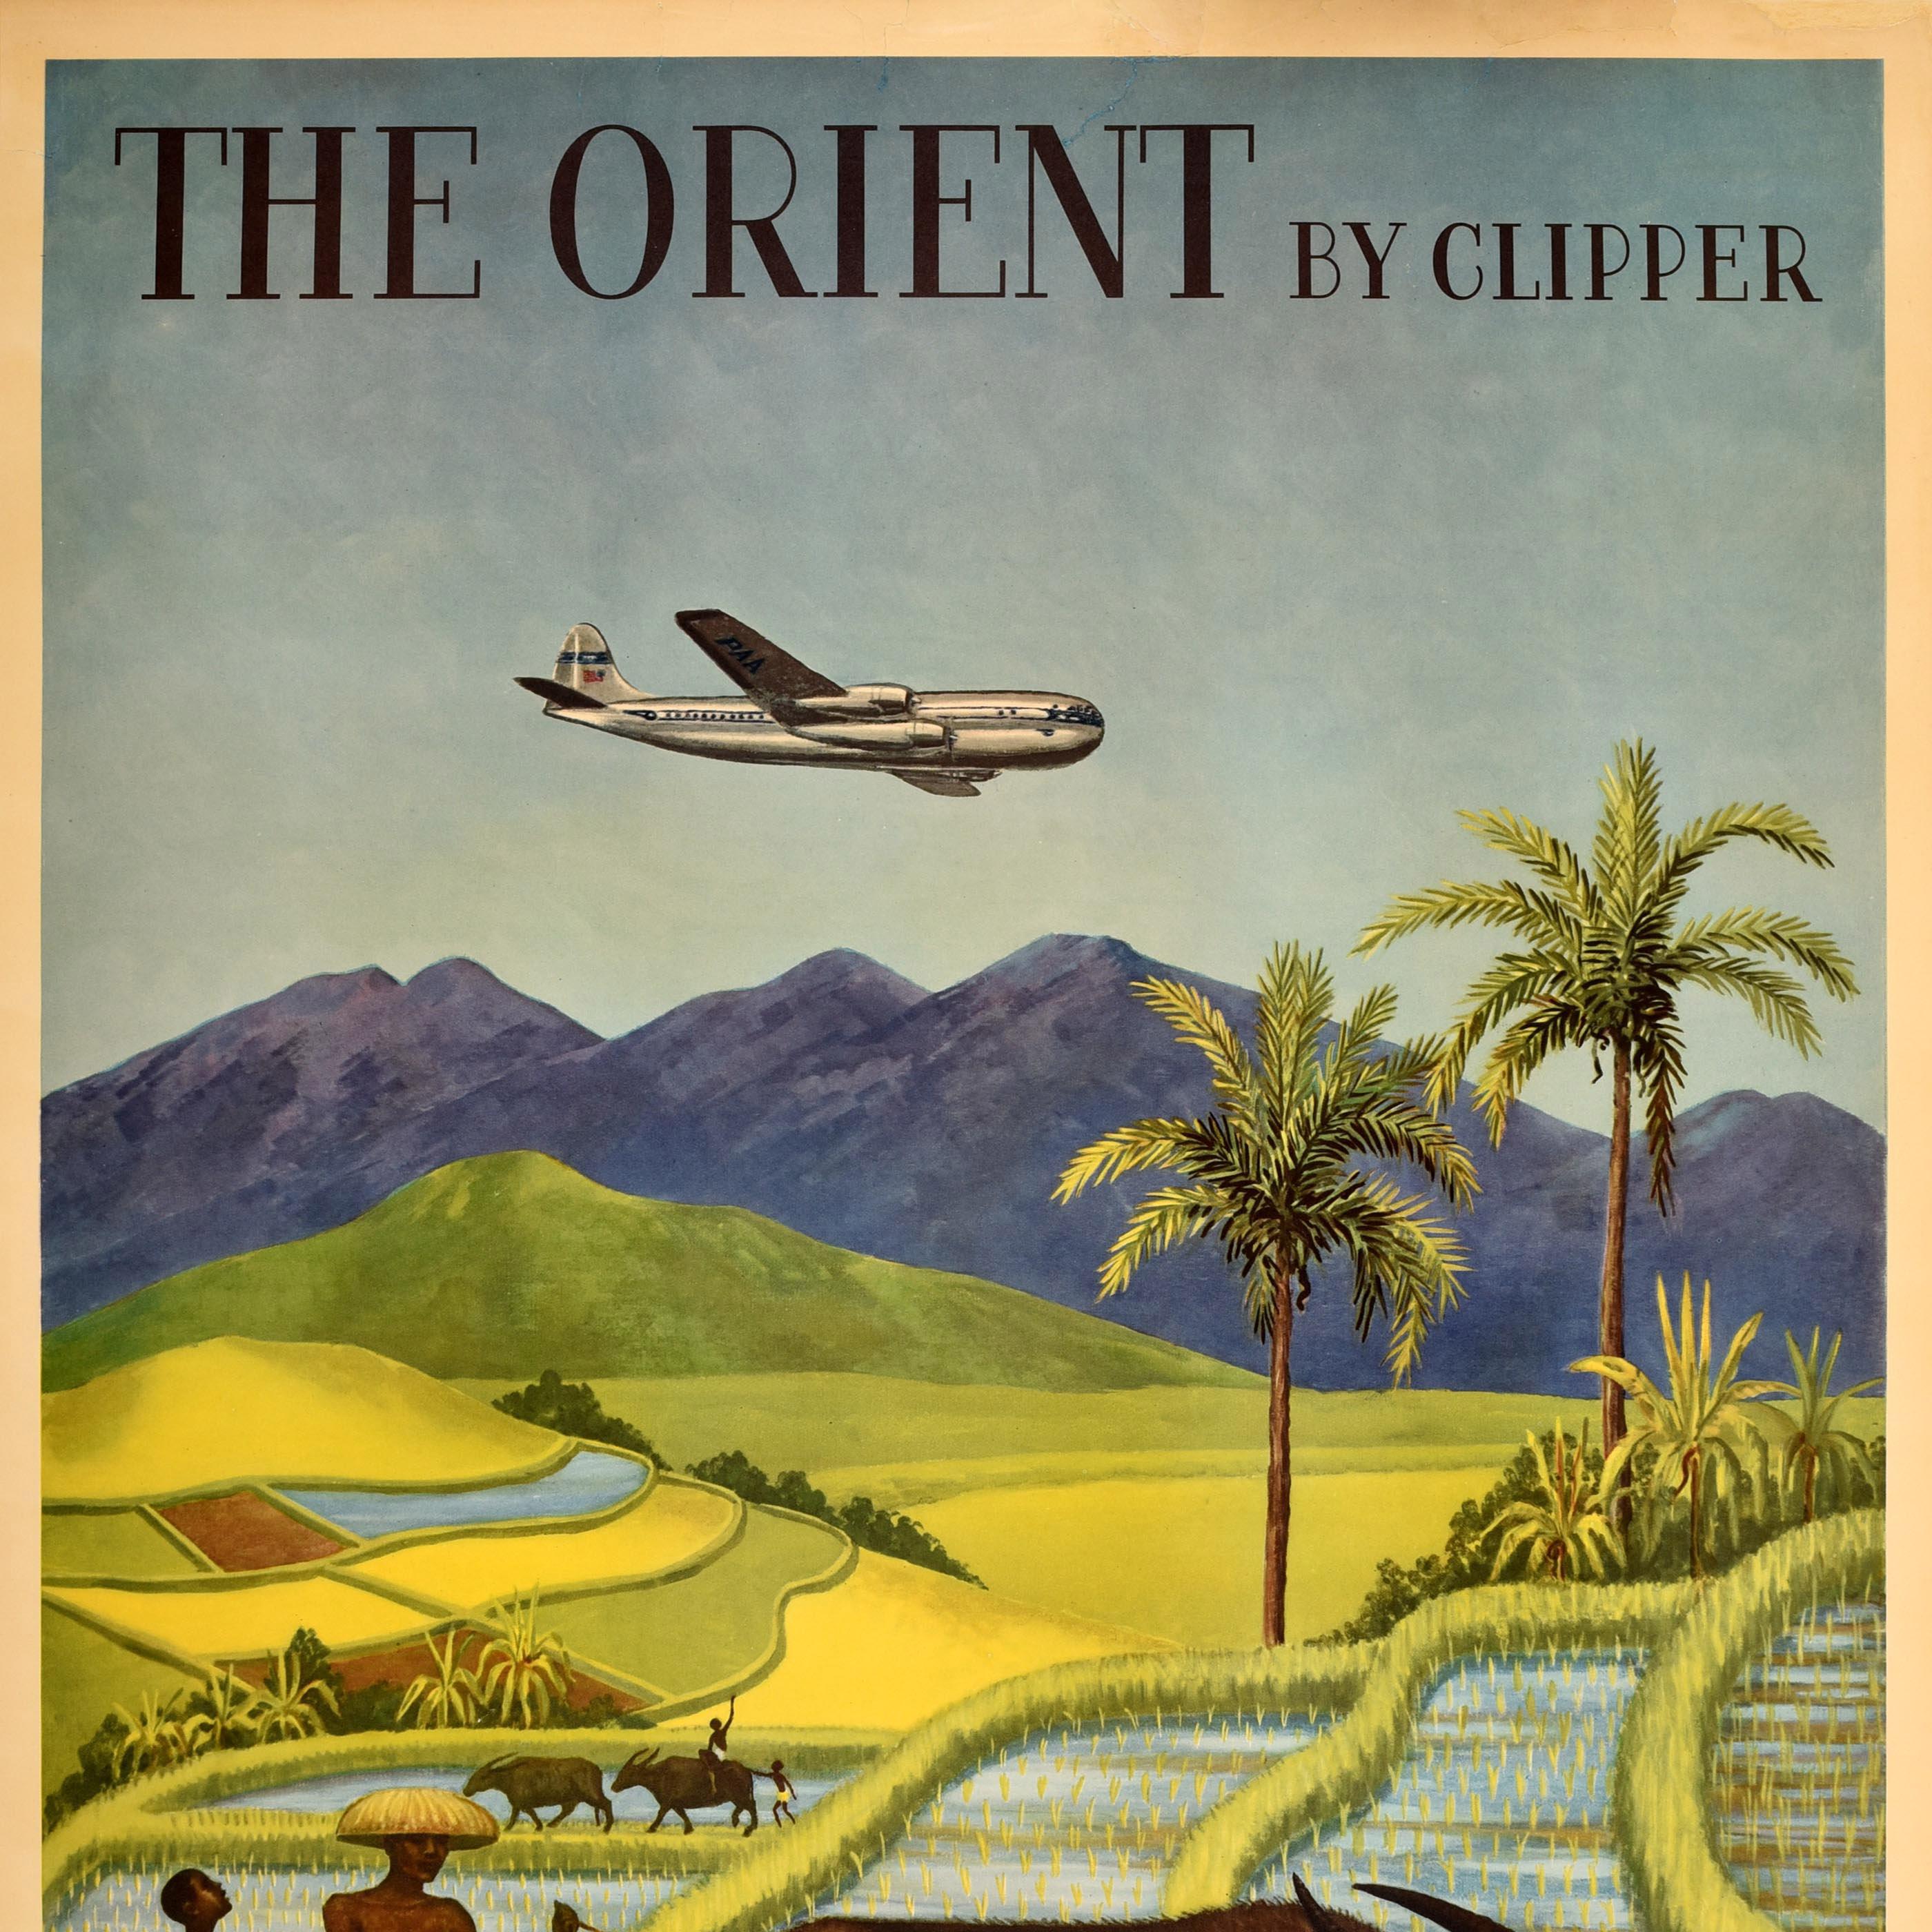 Original vintage Asia travel poster for The Orient by Clipper Pan American World Airways The World's Most Experienced Airline featuring artwork by Charles Baskerville (1896-1994) depicting men working on the paddy fields farming rice with the help